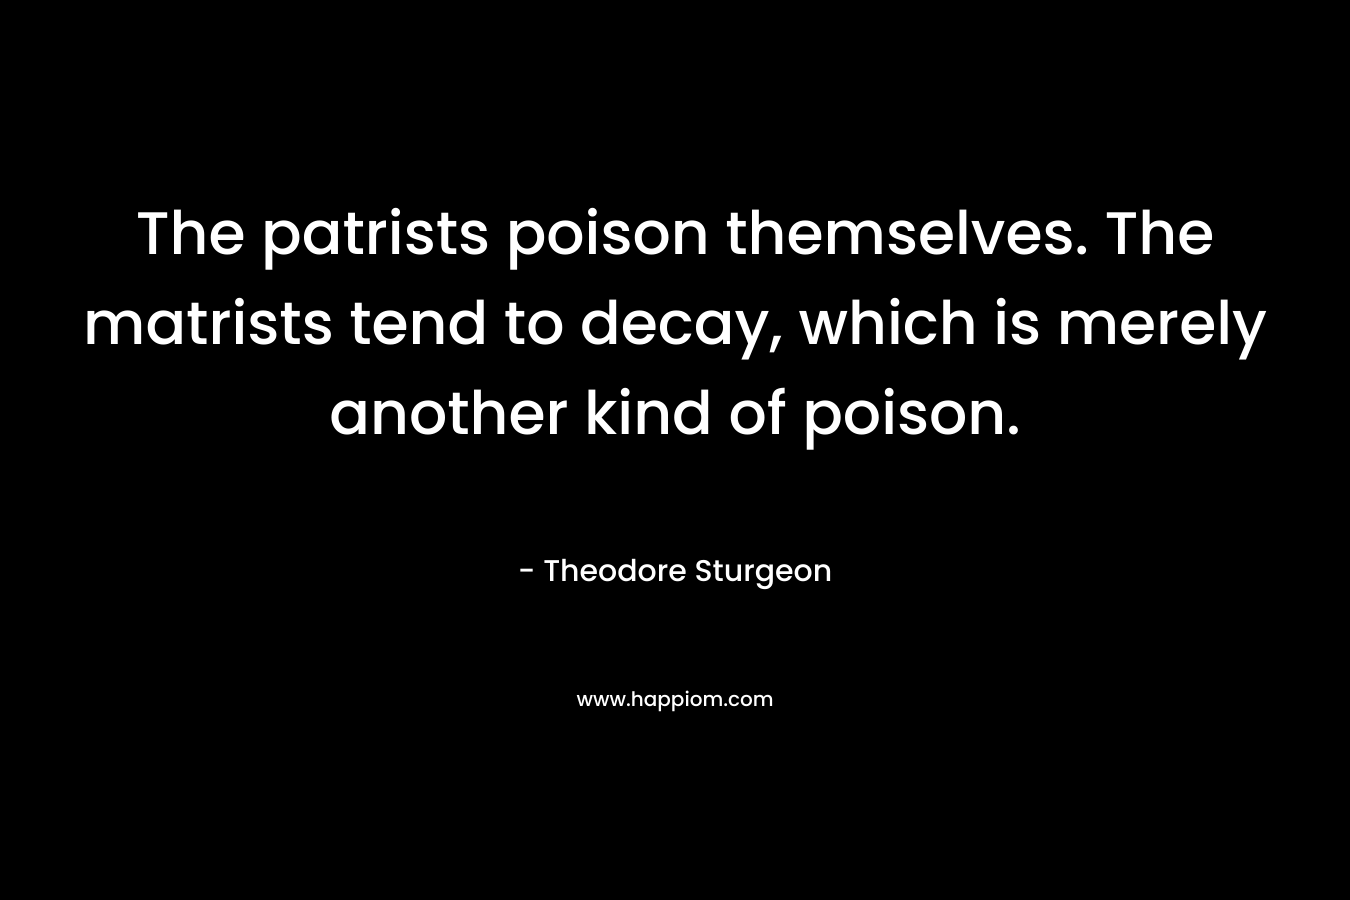 The patrists poison themselves. The matrists tend to decay, which is merely another kind of poison.